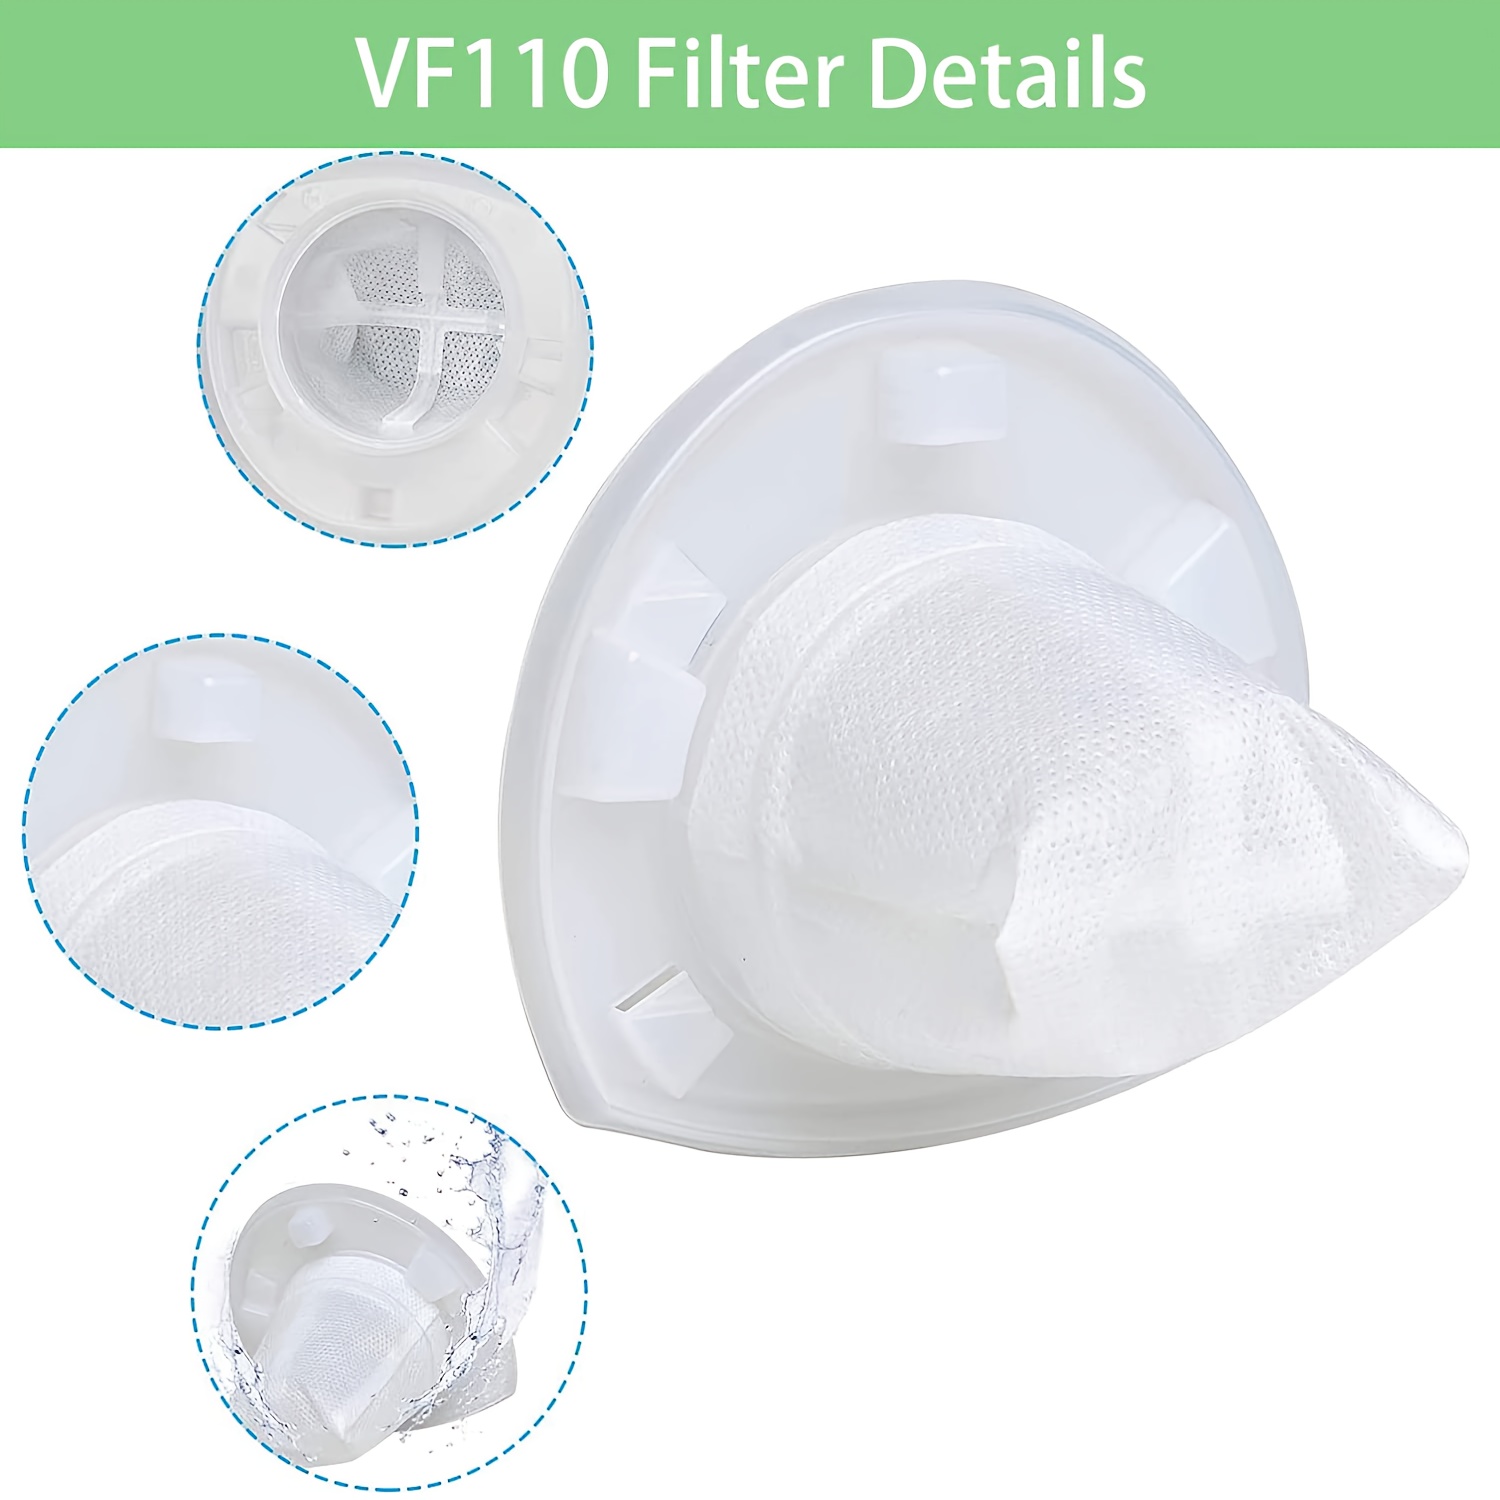 6 Pack Replacement Vacuum Filter for Black & Decker Power Tools VF110  Vacuum CHV1410L CHV9610 CHV1210 CHV1510 CHV1410L32 90558113-01, Not for